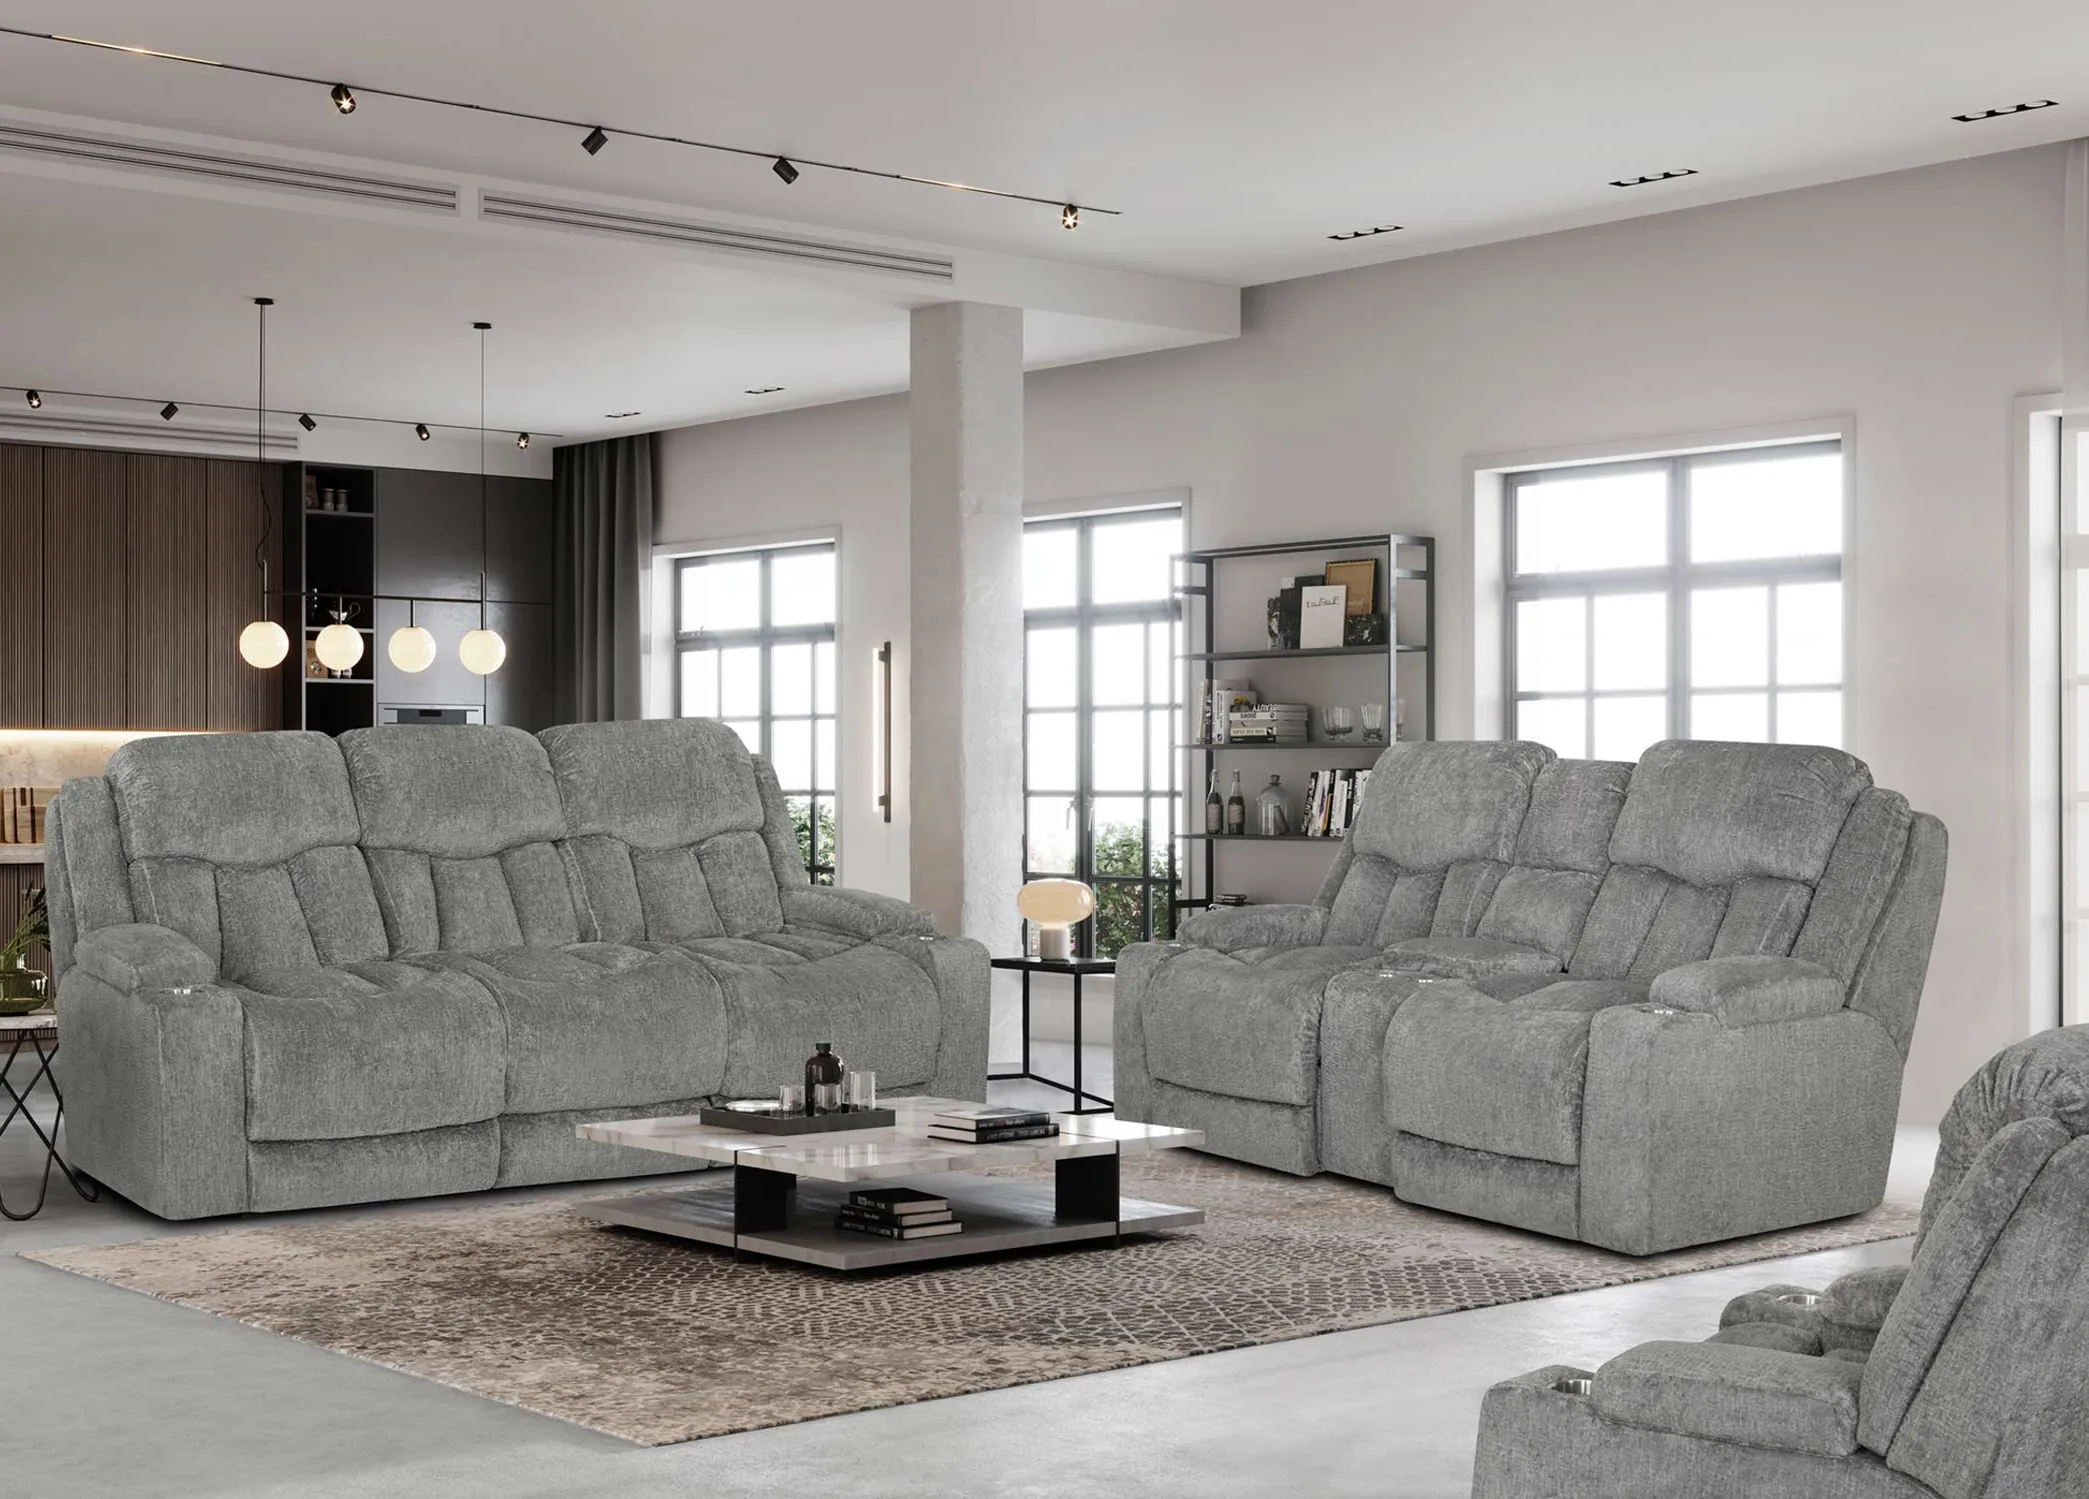 Euphoria Power Headrest Reclining Sofa With Massage and Drop Down Table in Ash